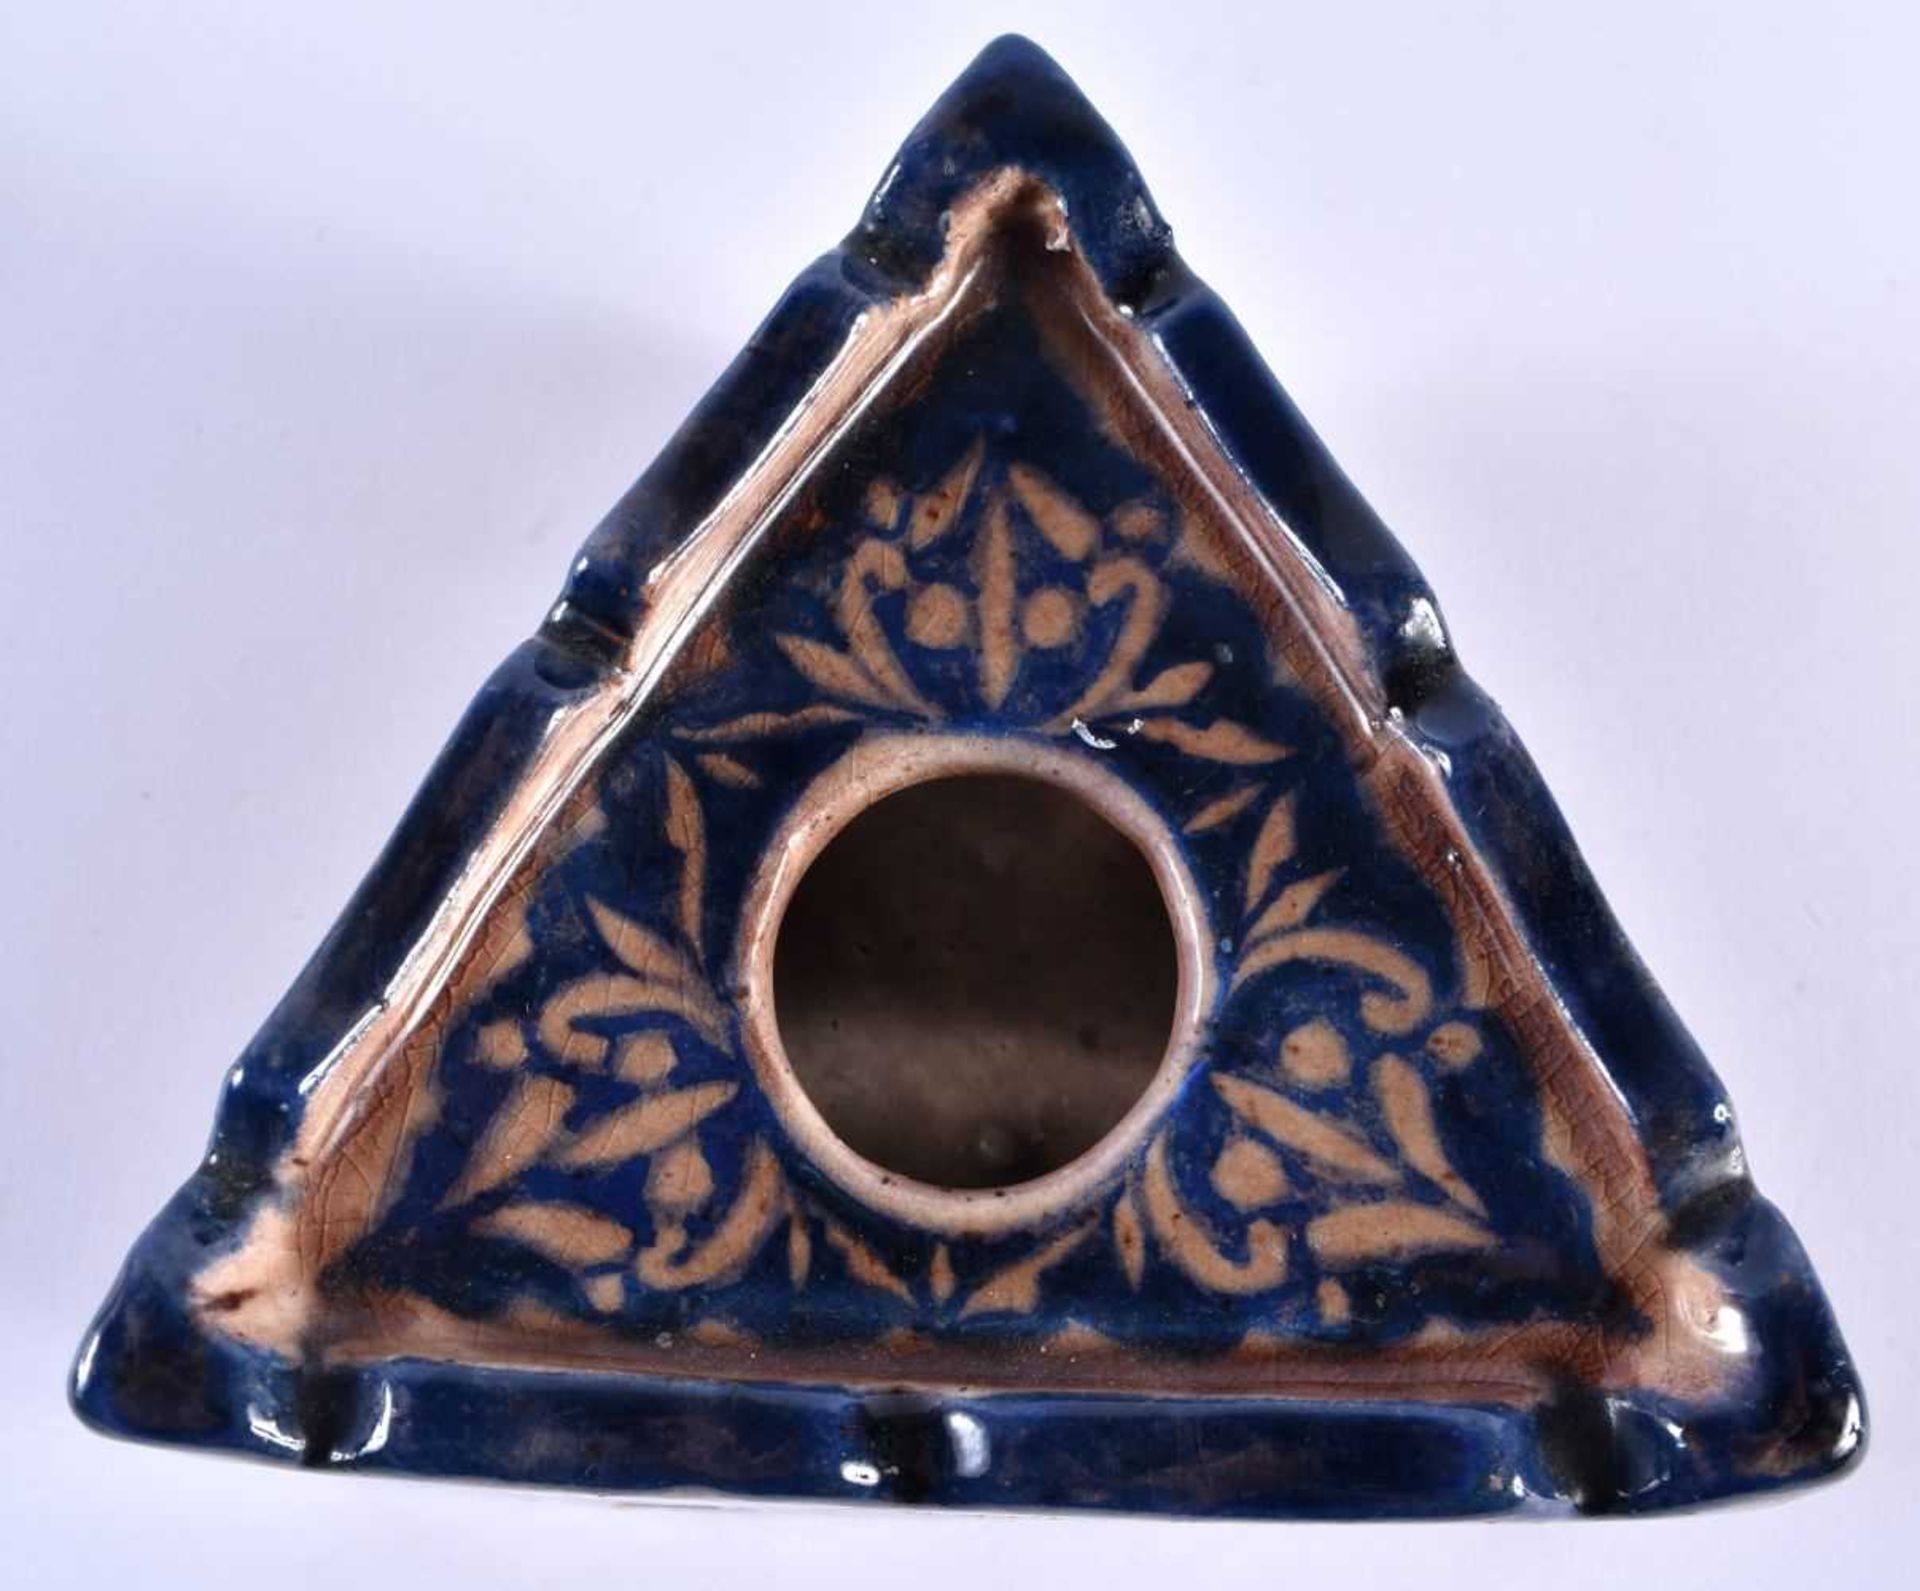 A PERSIAN ISLAMIC MIDDLE EASTERN TRIANGULAR INKWELL. 12 cm wide. - Image 4 of 5